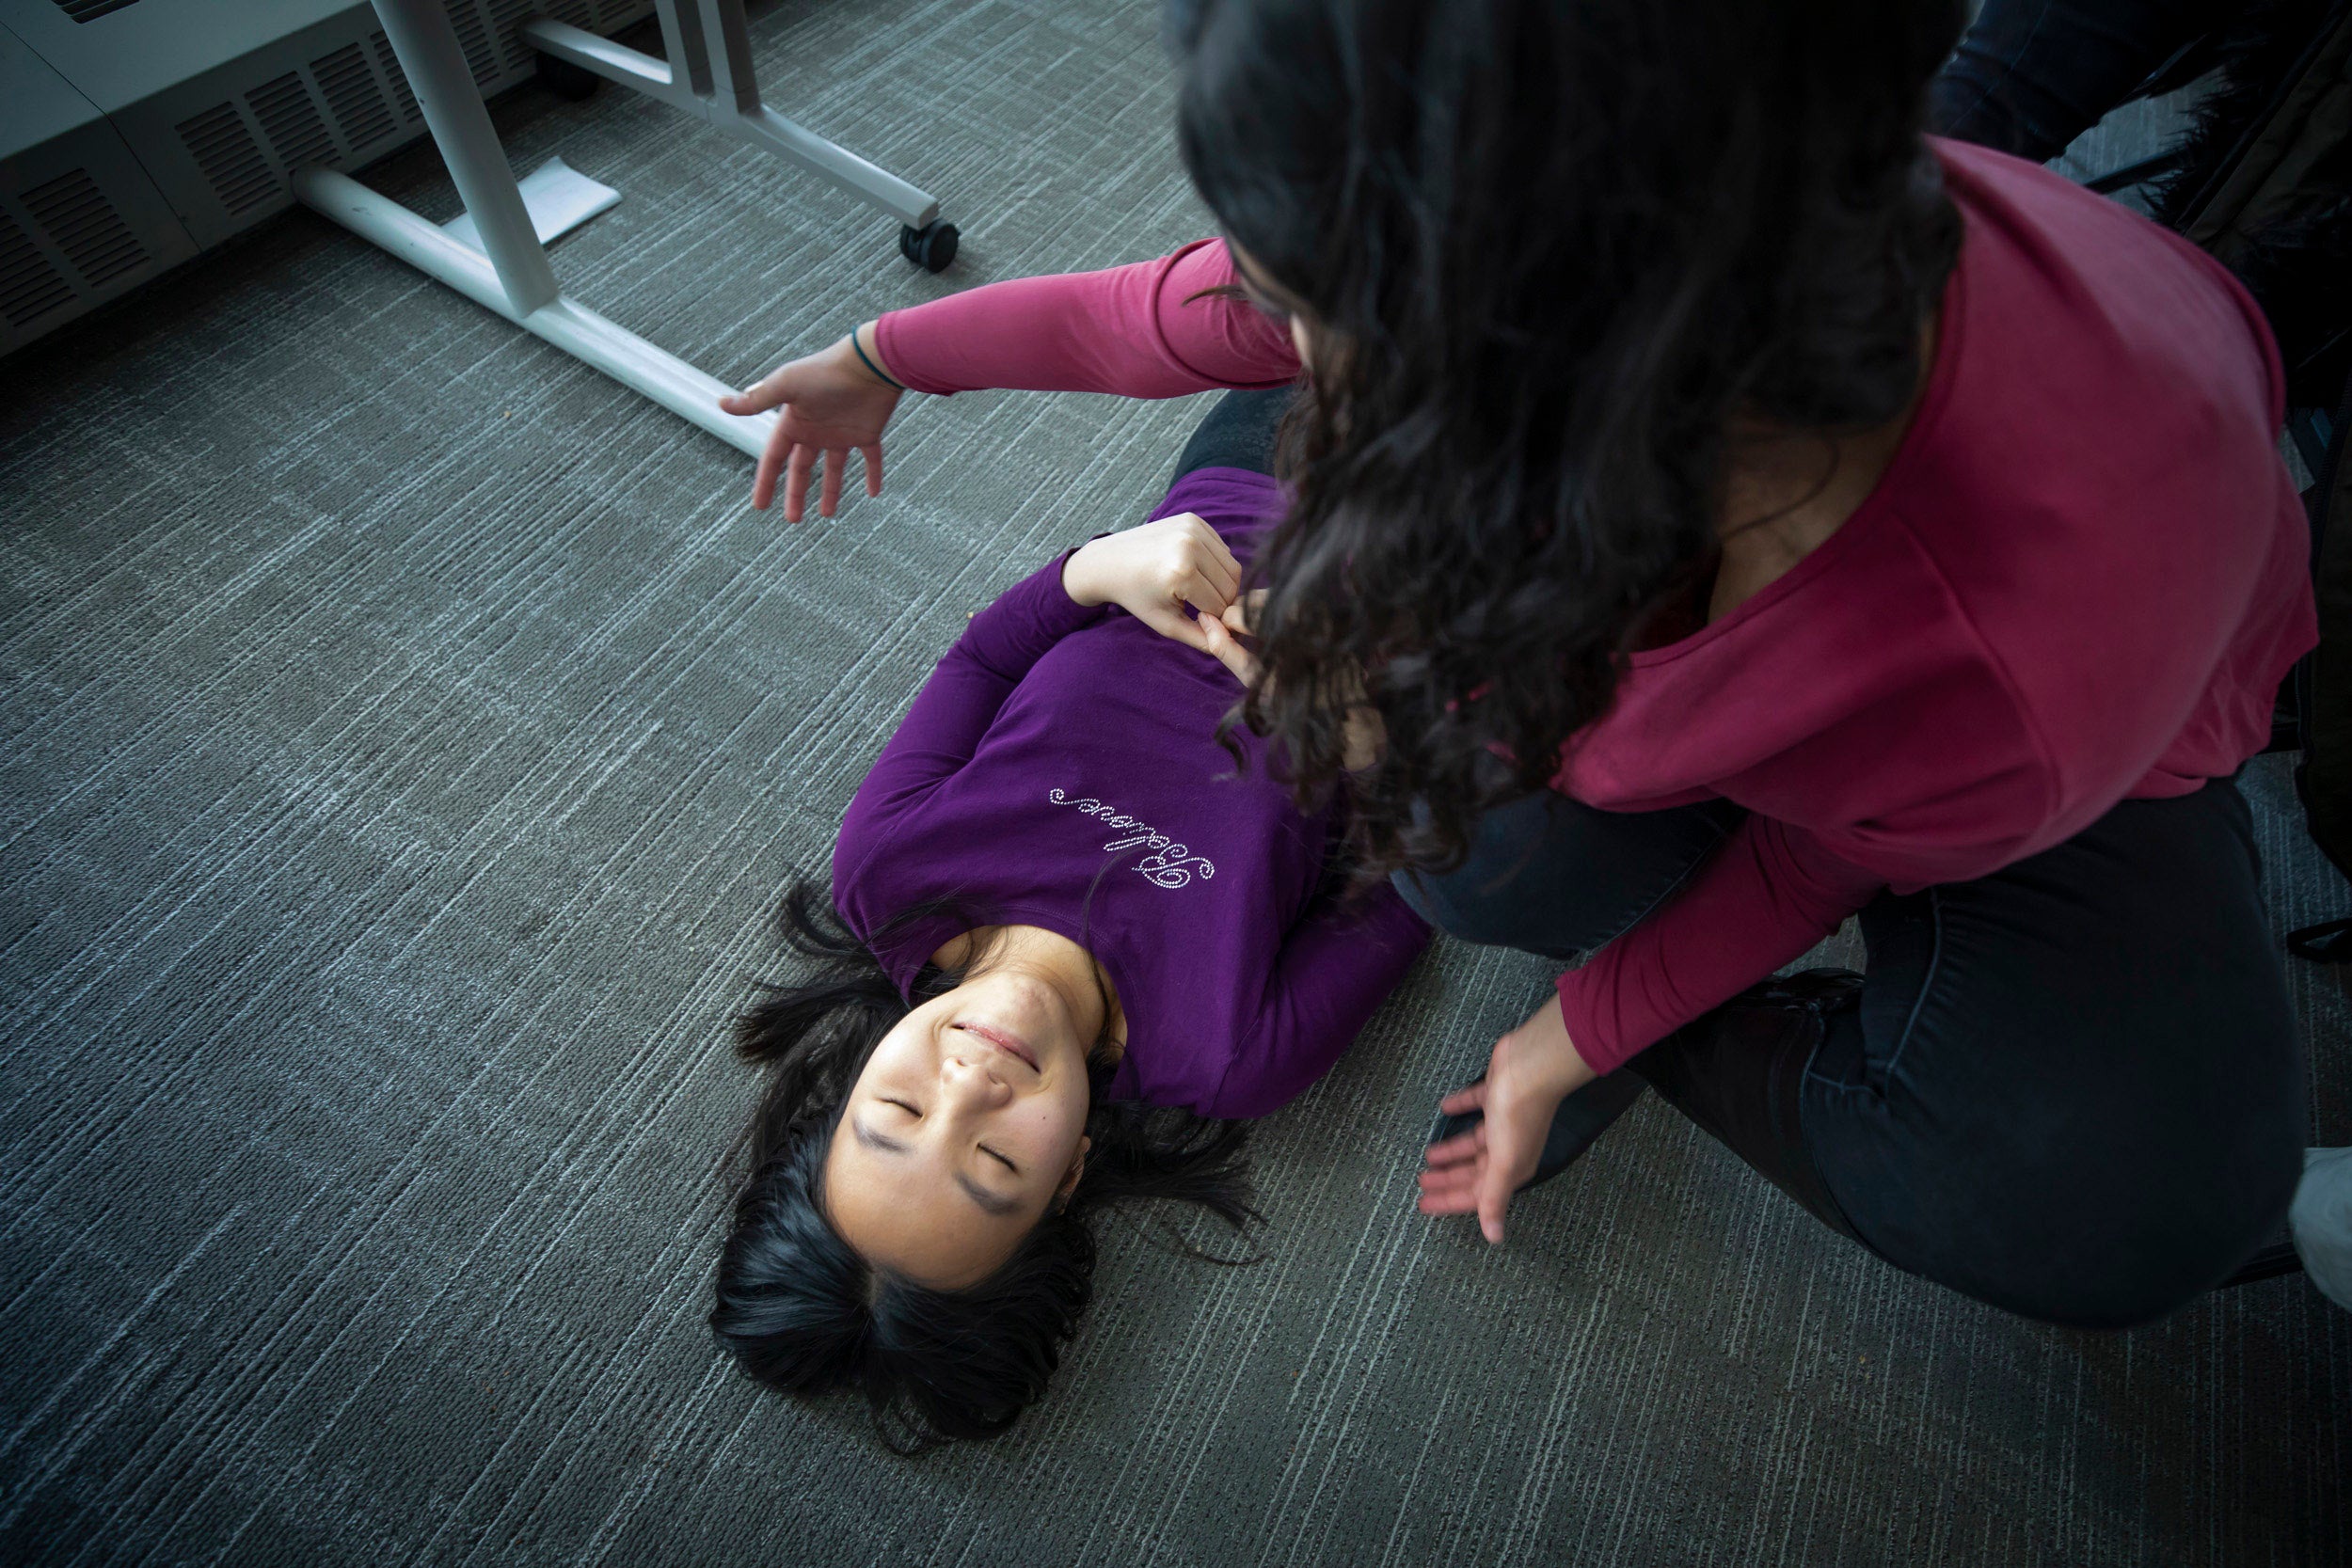 A student lies on the floor as another checks for bleeding.